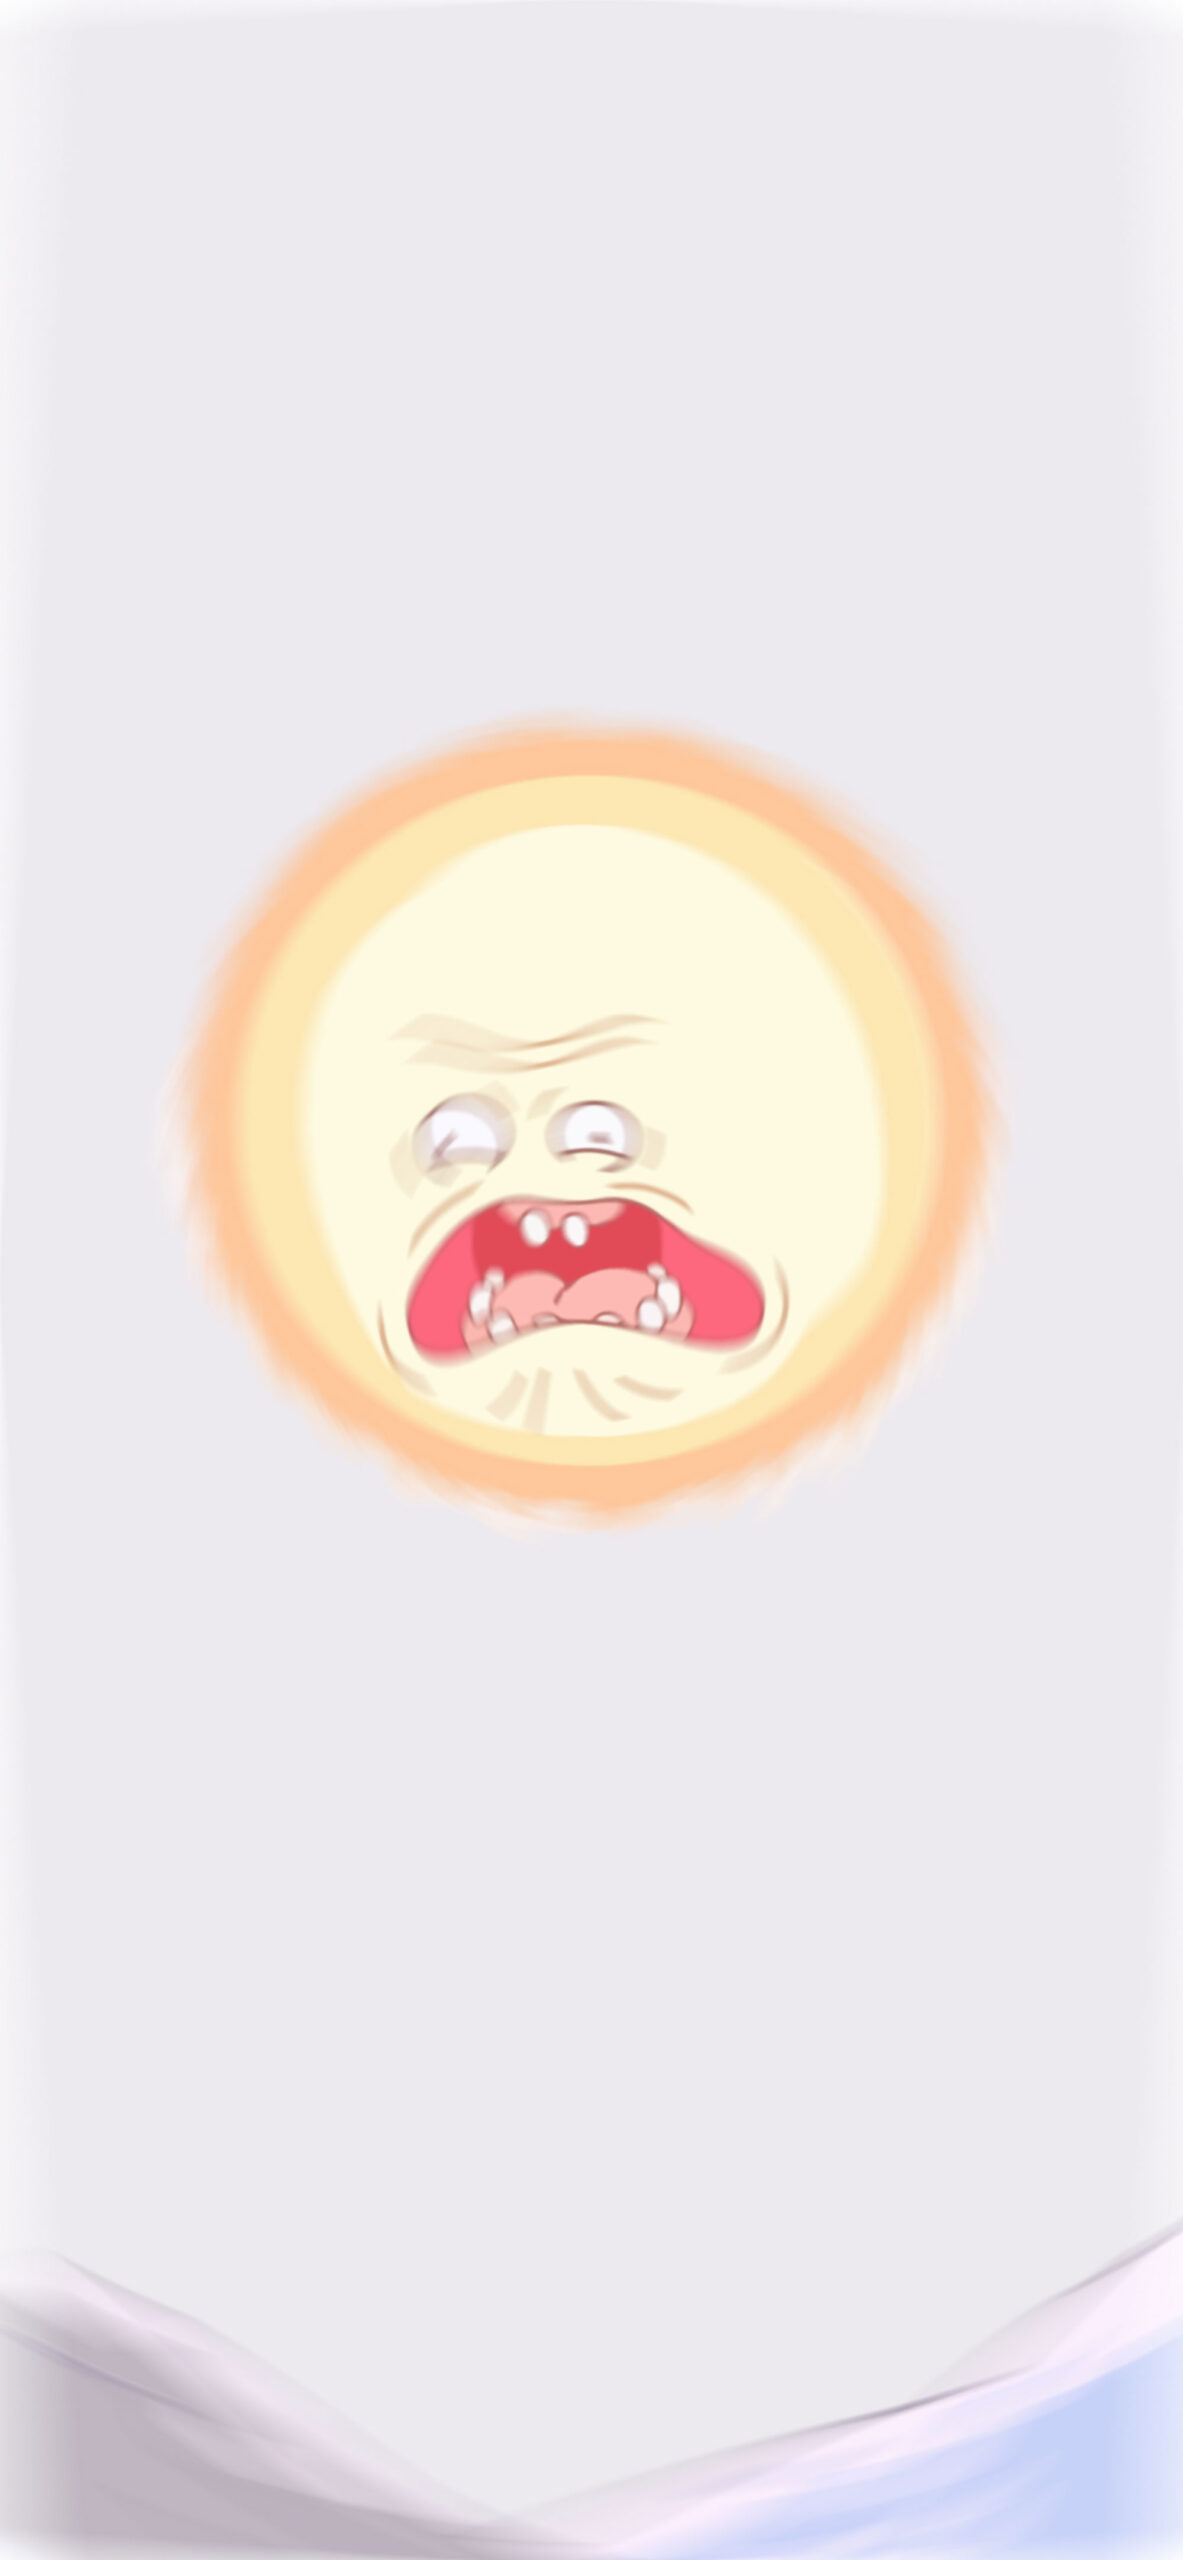 rick and morty screaming sun background